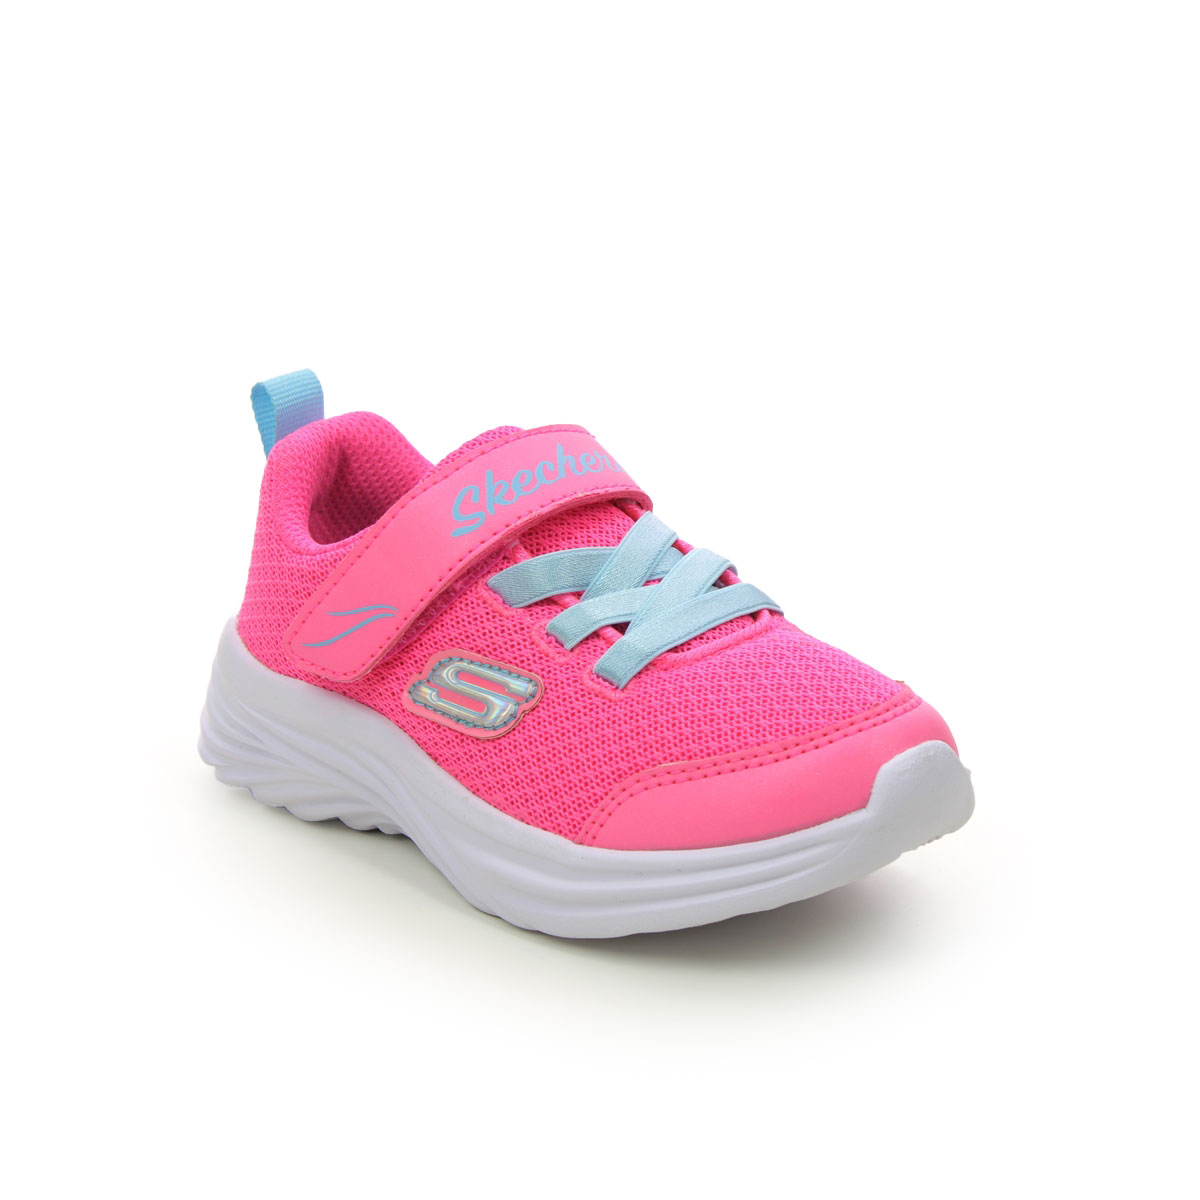 Skechers Dreamy Dancer Infant Pink Turquoise Kids Girls Trainers 302450N In Size 24 In Plain Pink Turquoise